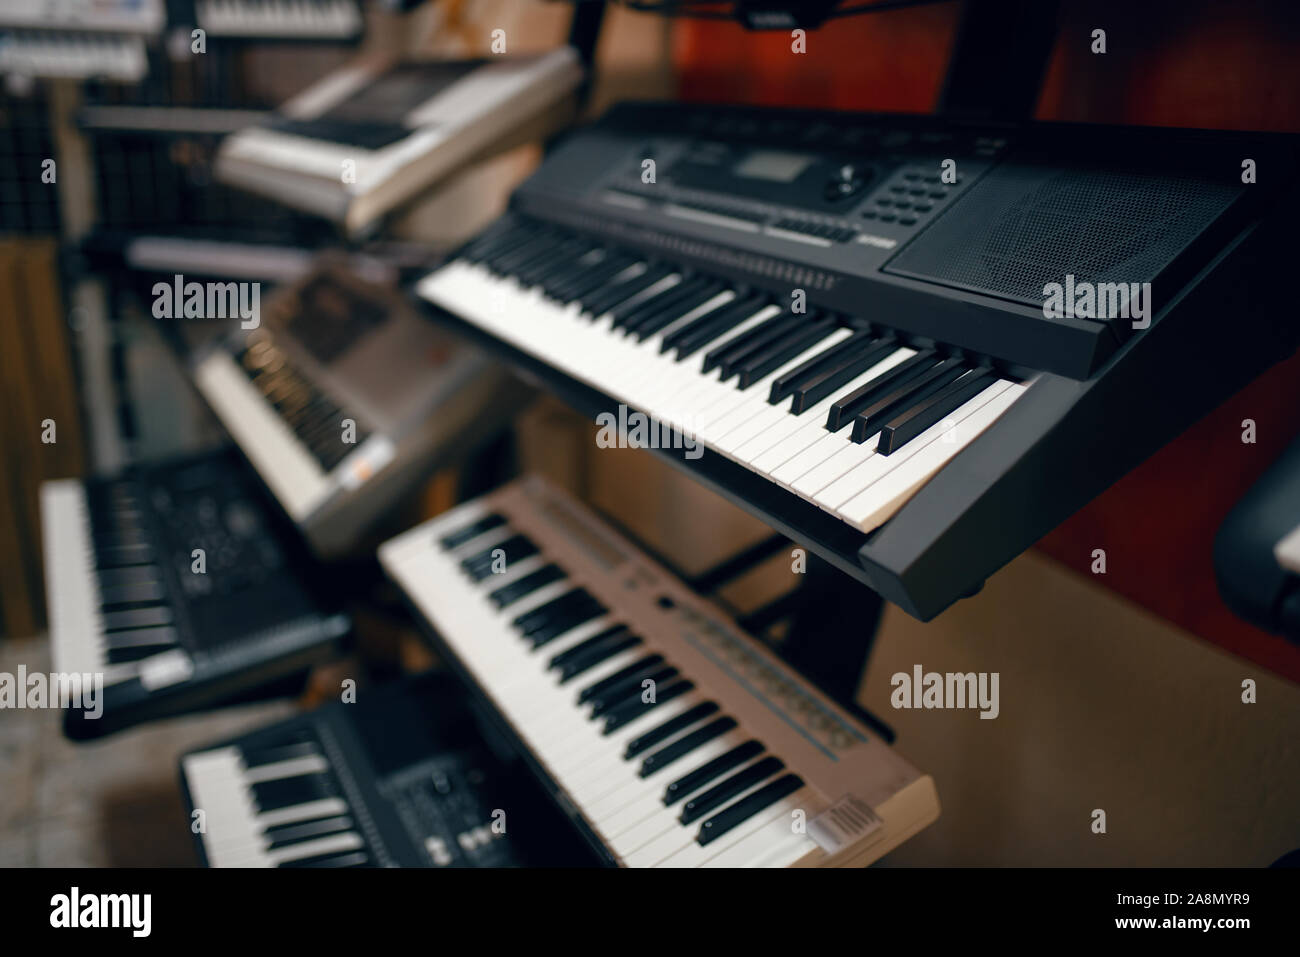 The keyboard and piano shop